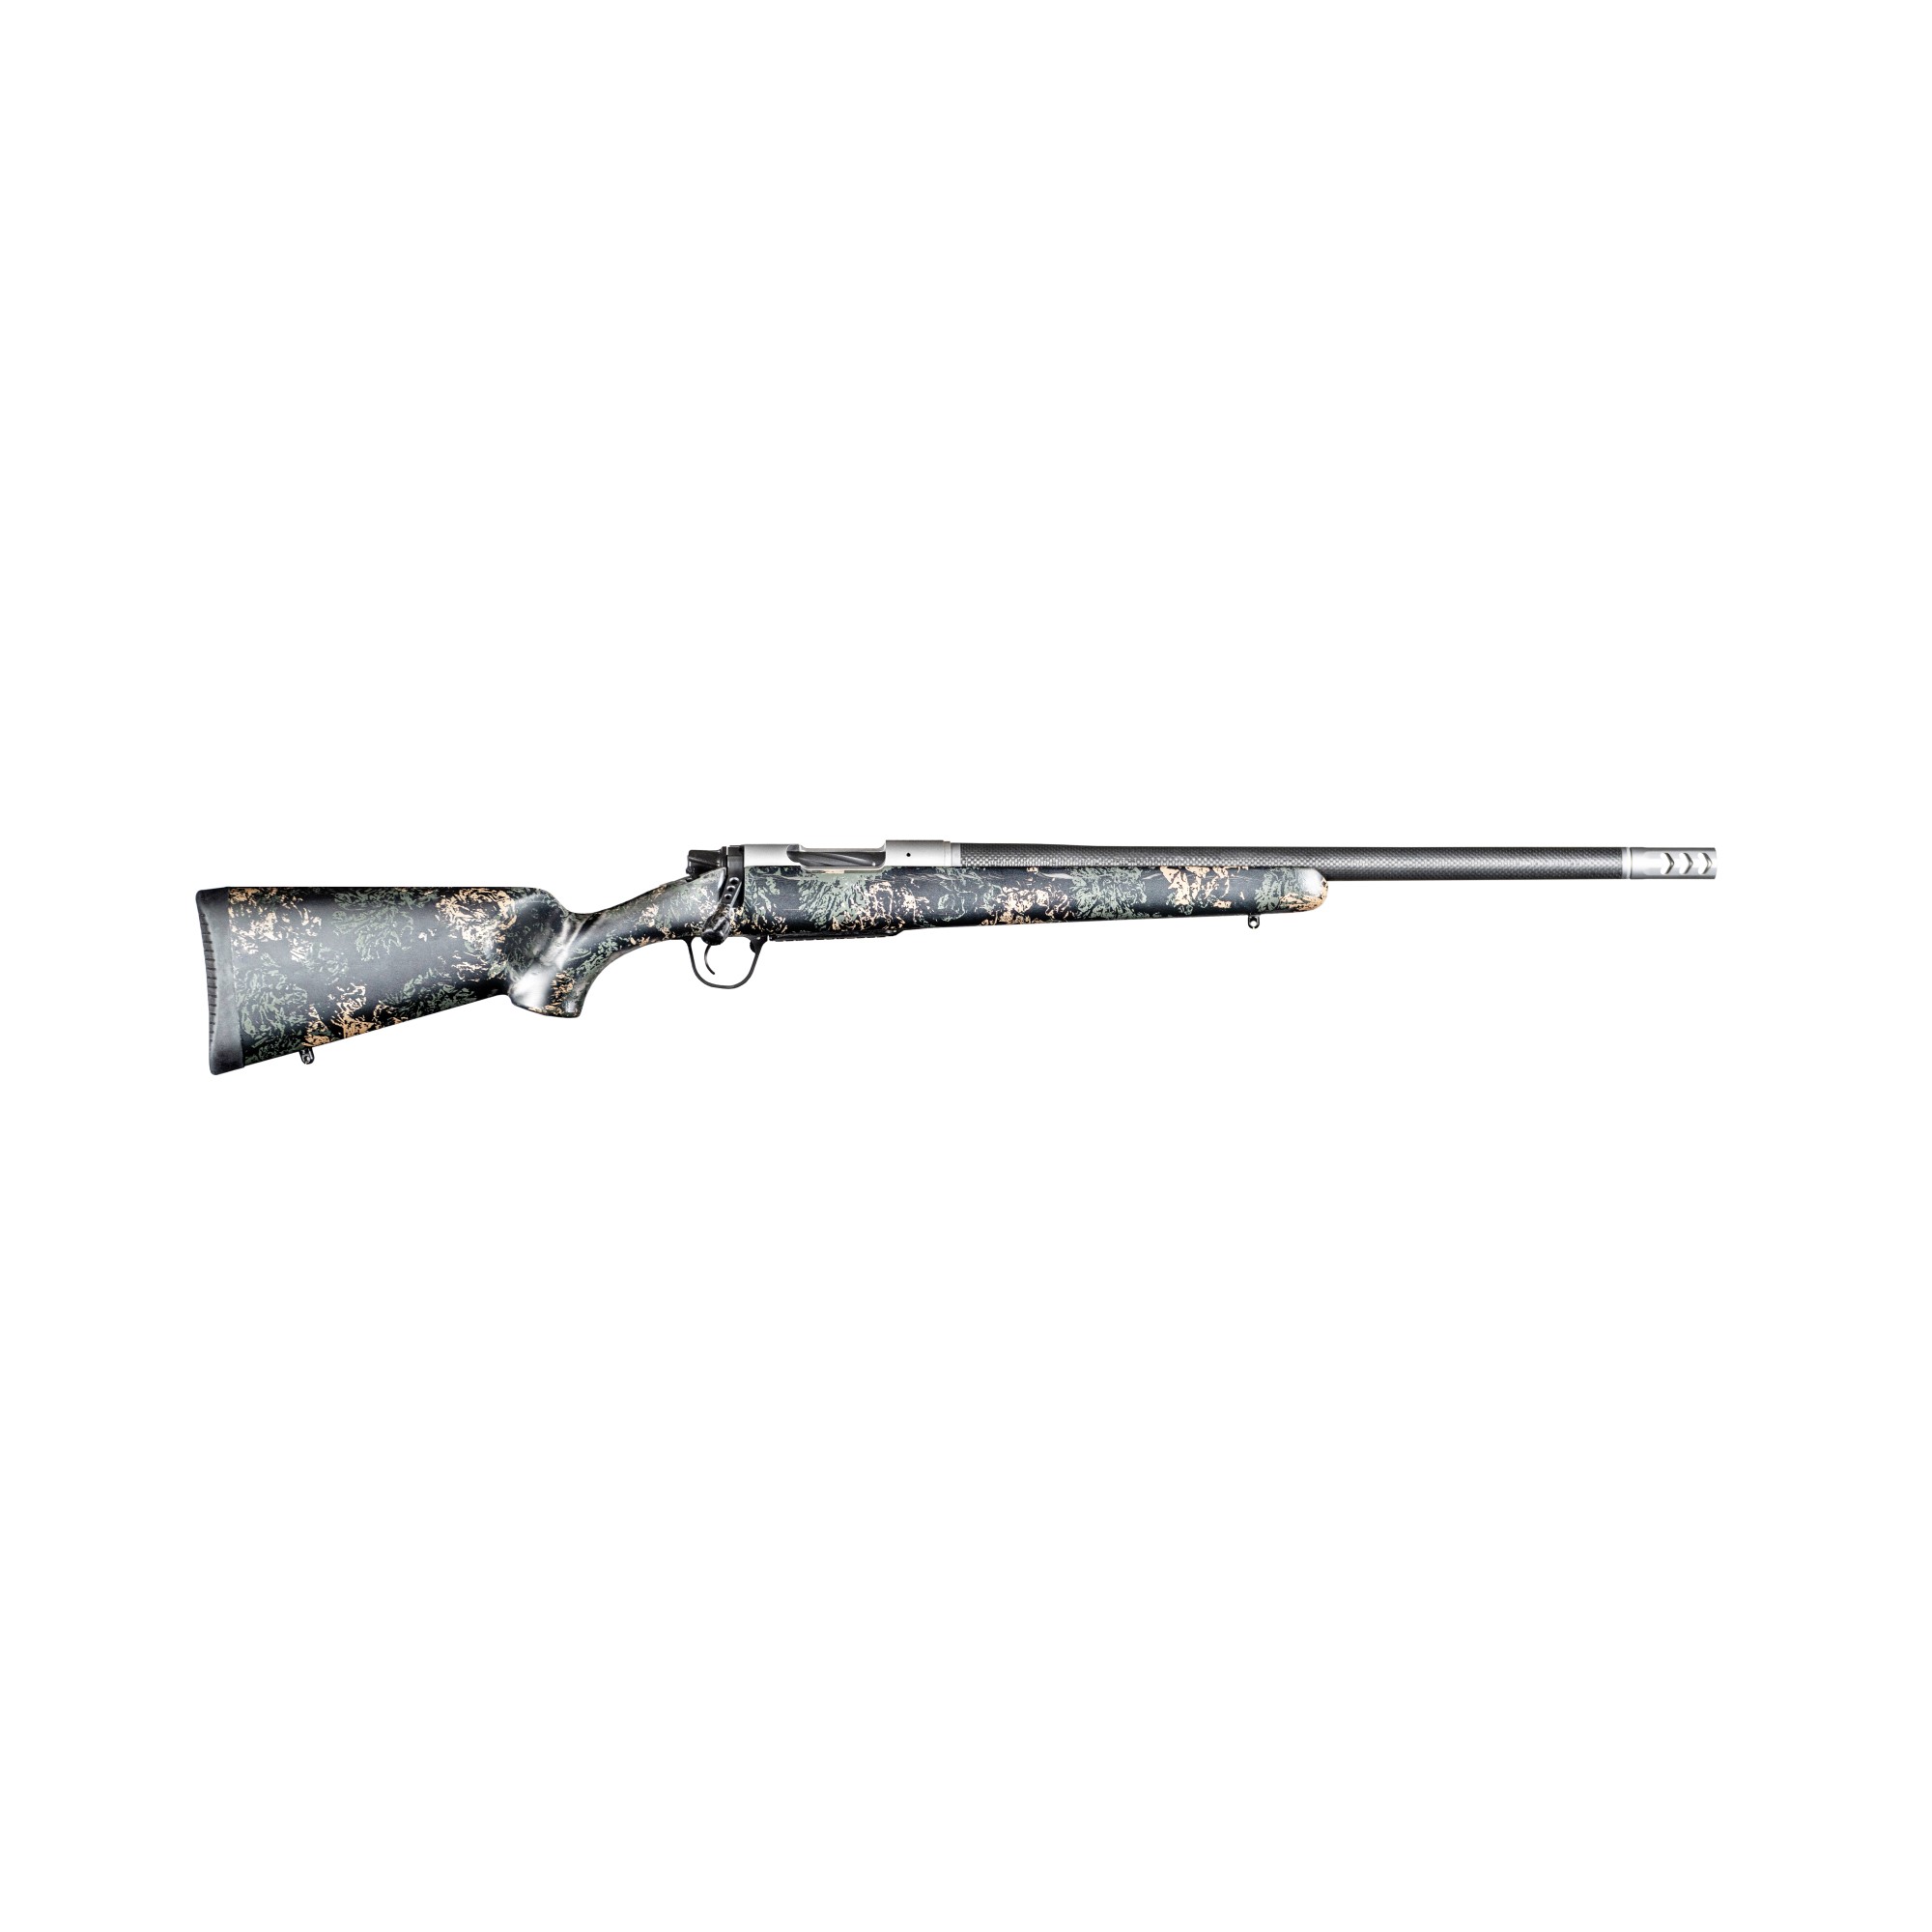 M12 BOLT-ACTION RIFLE- 8X57 IS